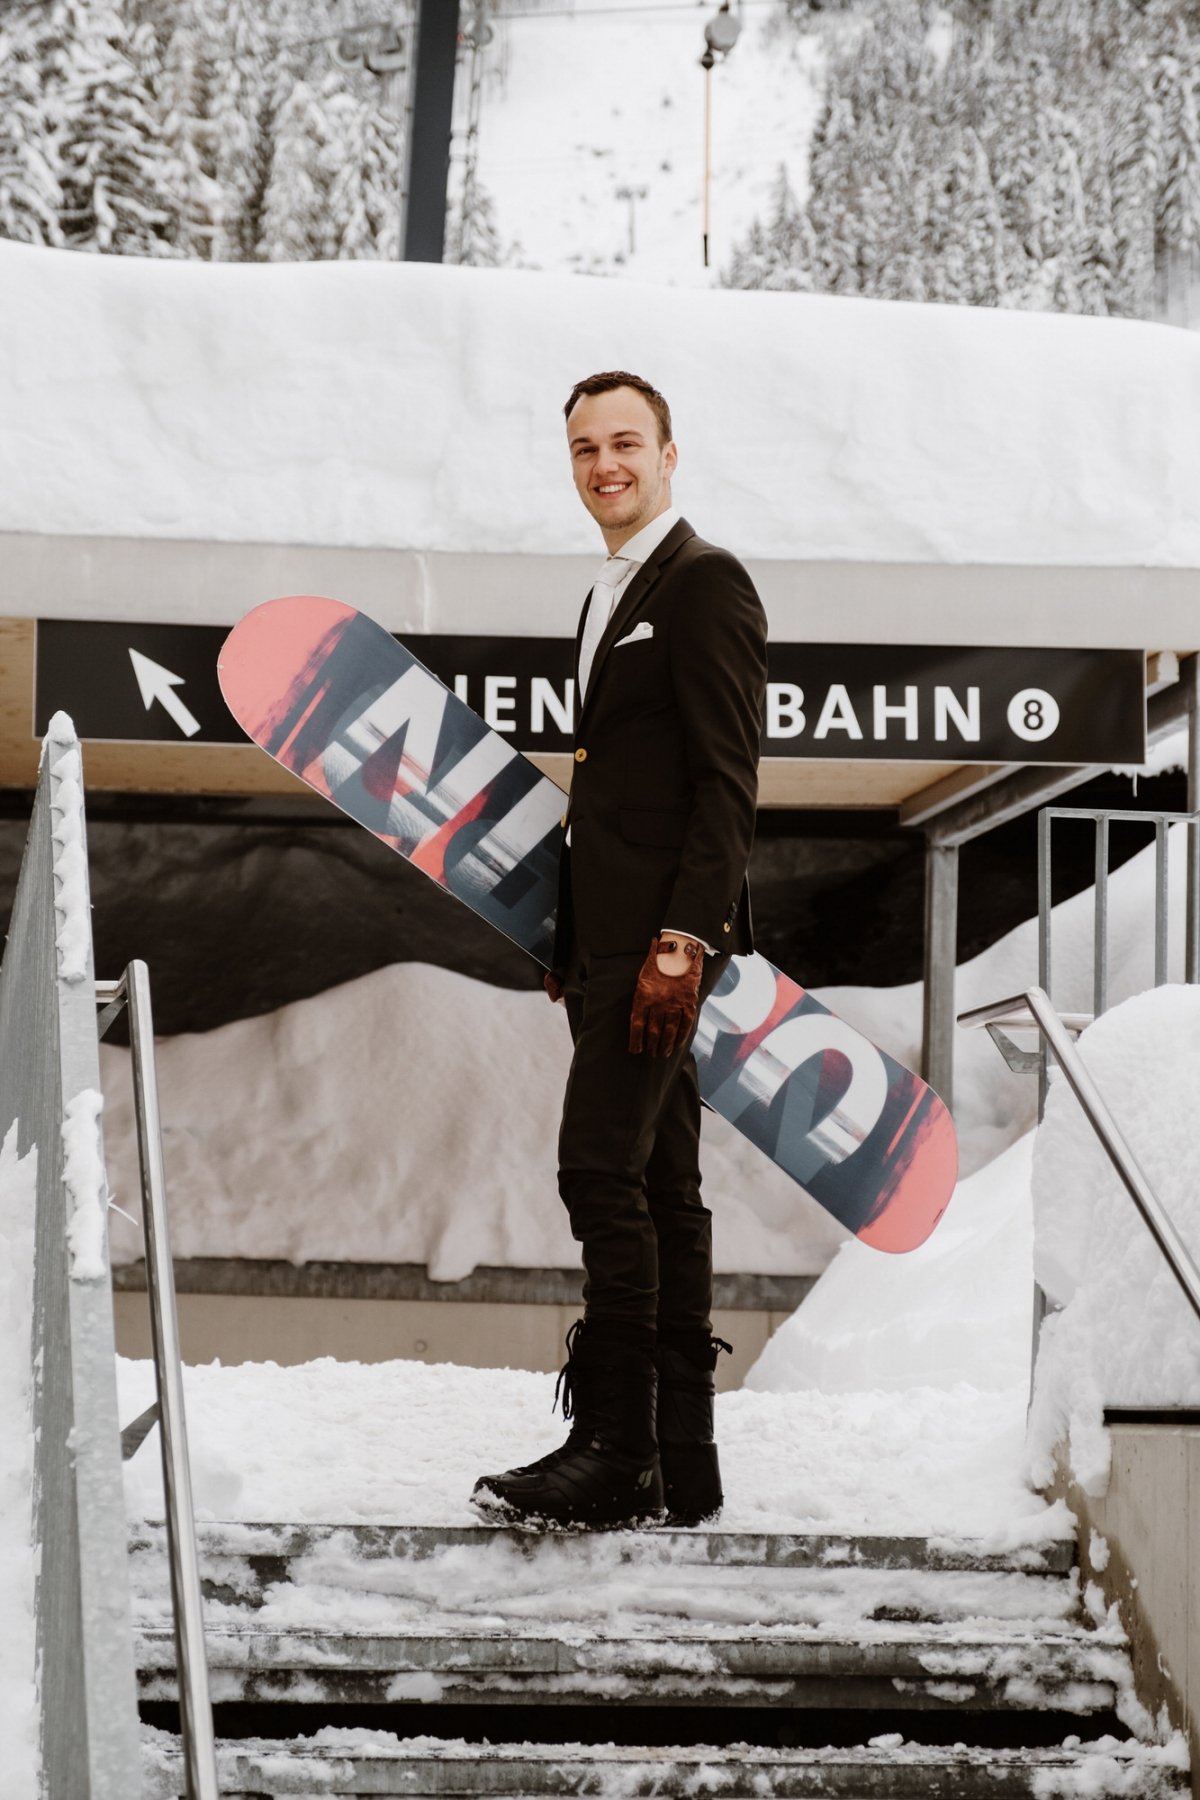 A groom in snowboarding boots, gloves and his own snowboard for a cool and inspiring wedding portrait